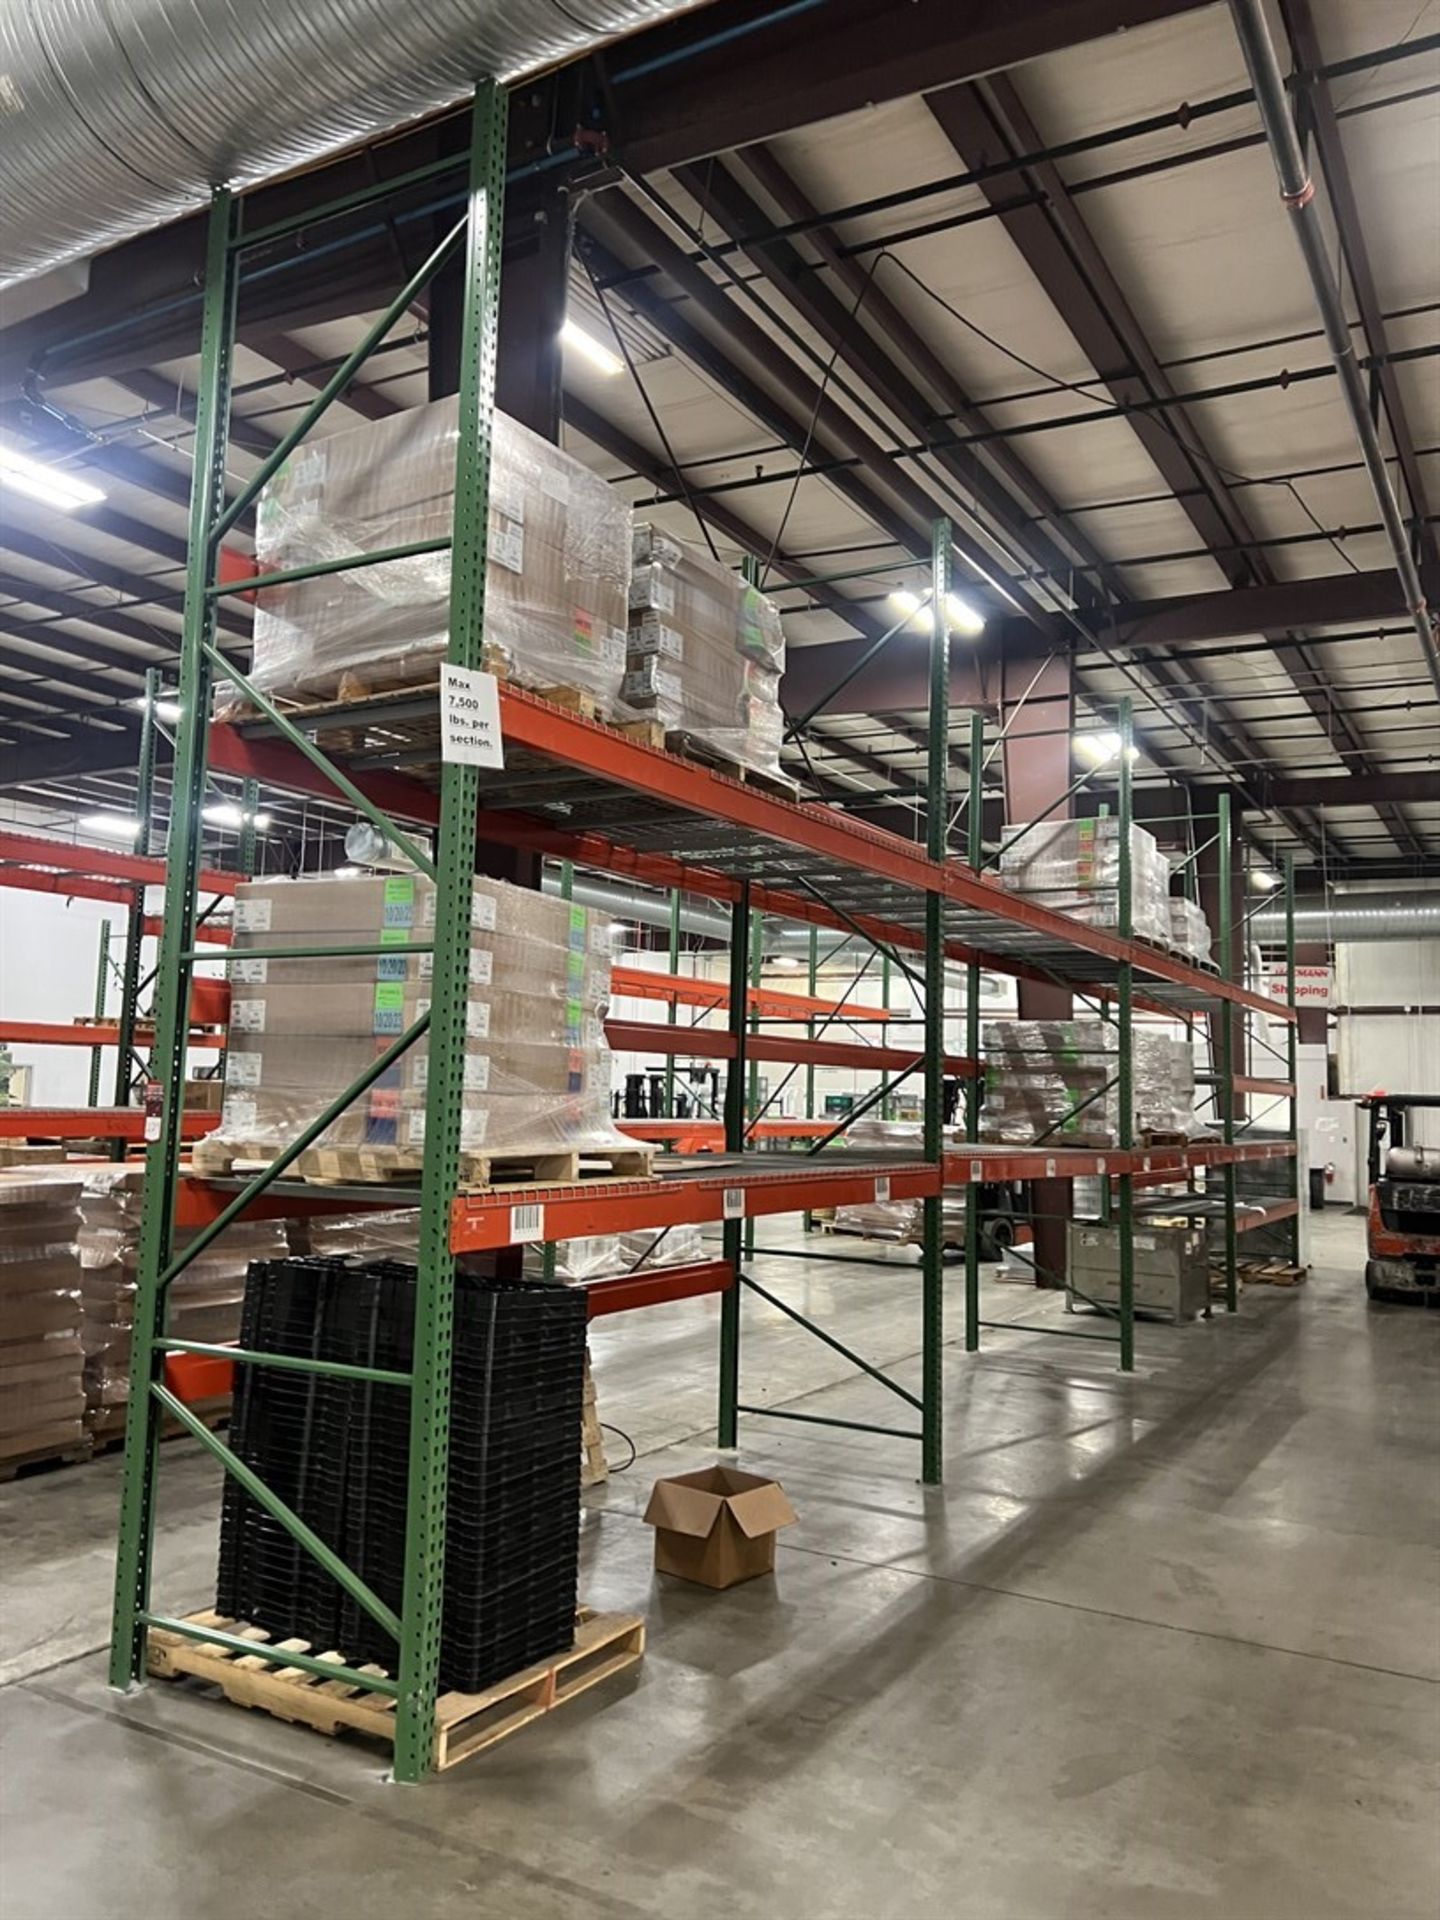 Lot of (4) Sections of Pallet Racking, 16' Uprights, 48" Deep, 12' Crossbeams - Image 2 of 2